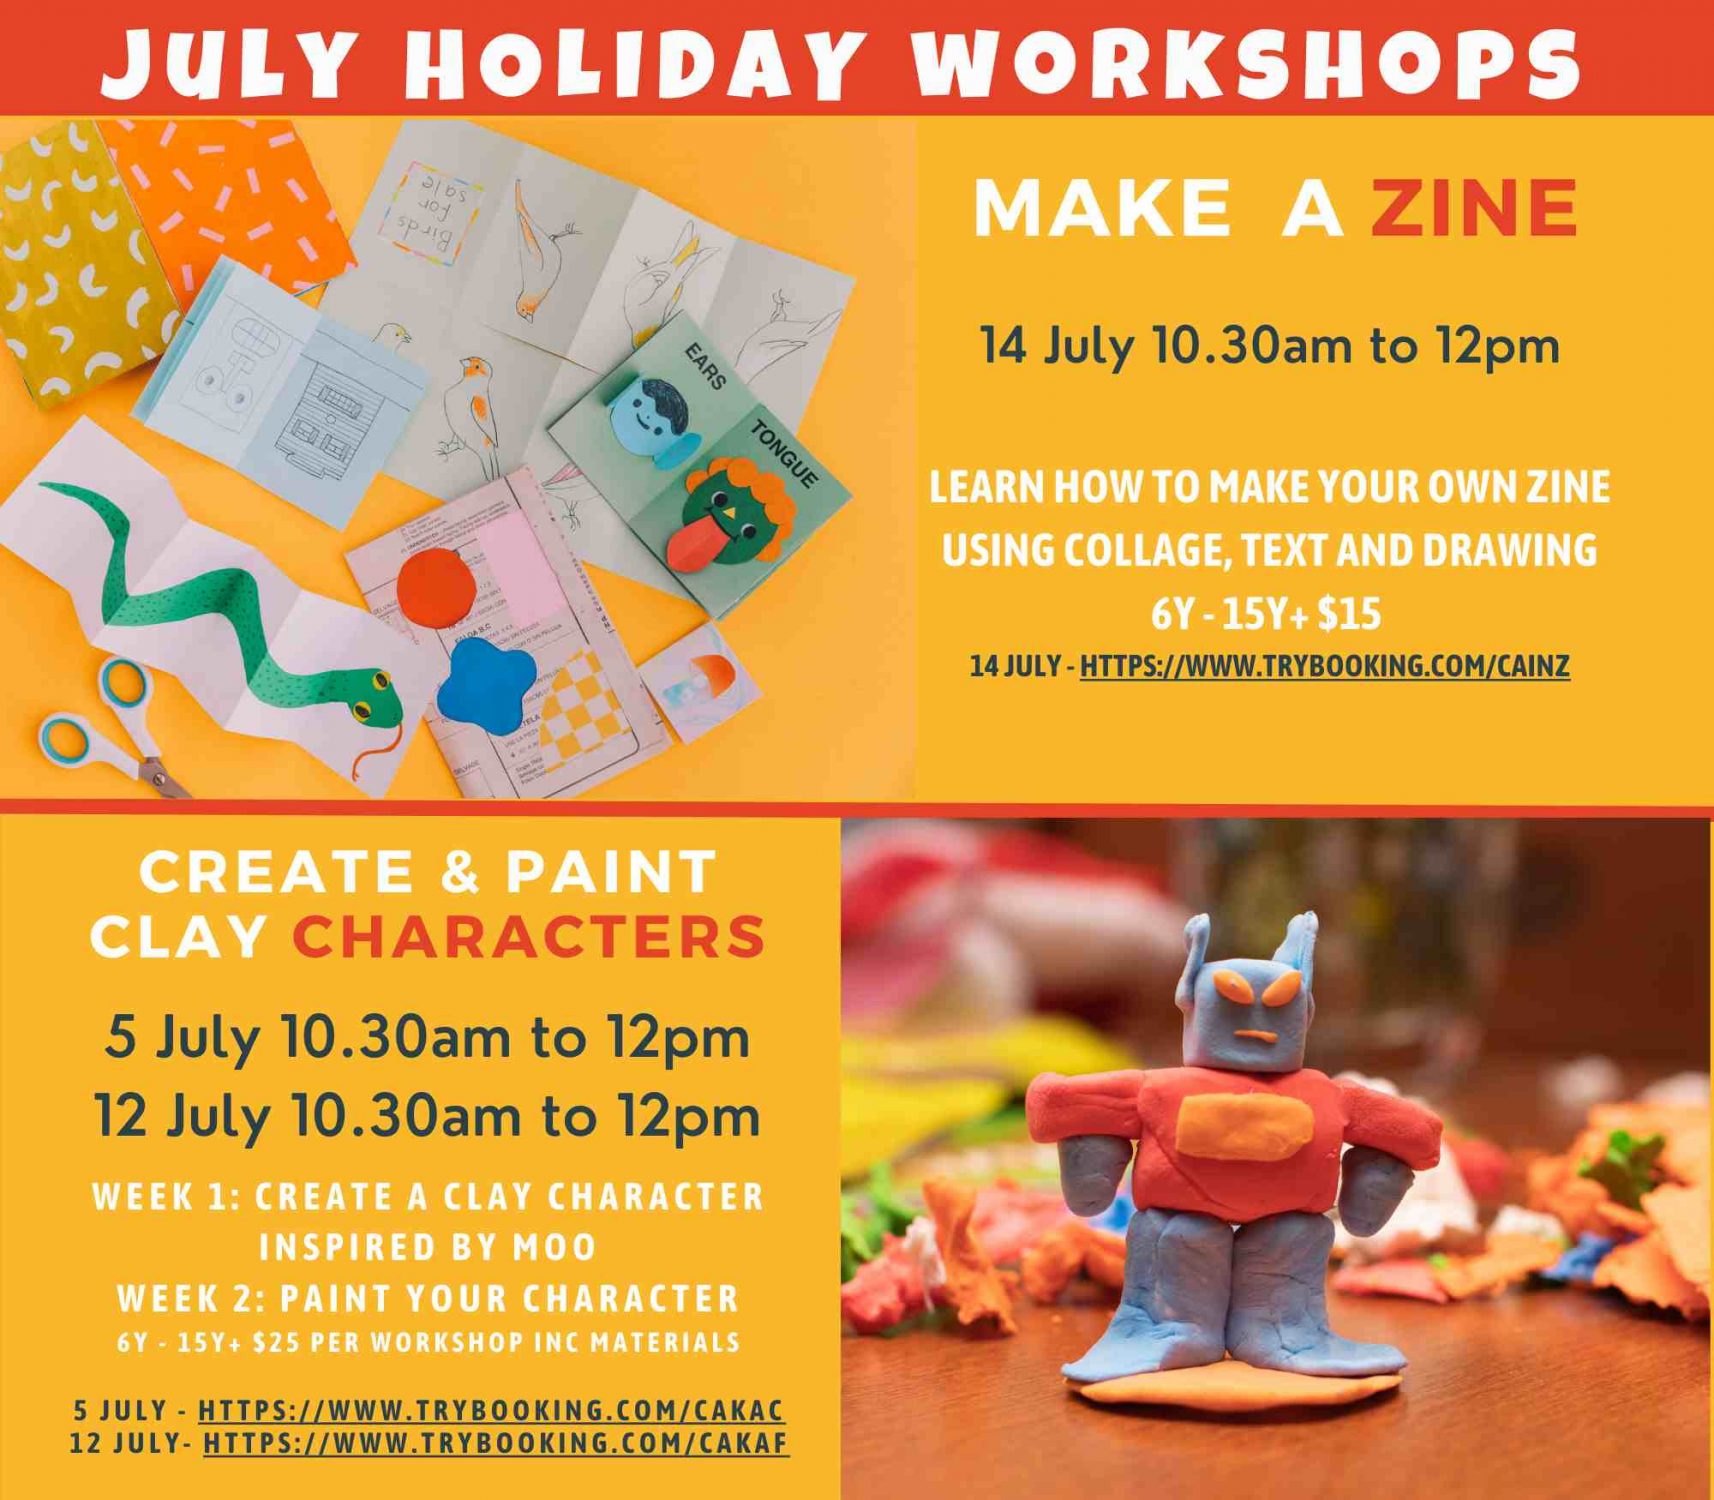 Create and Paint Clay Characters